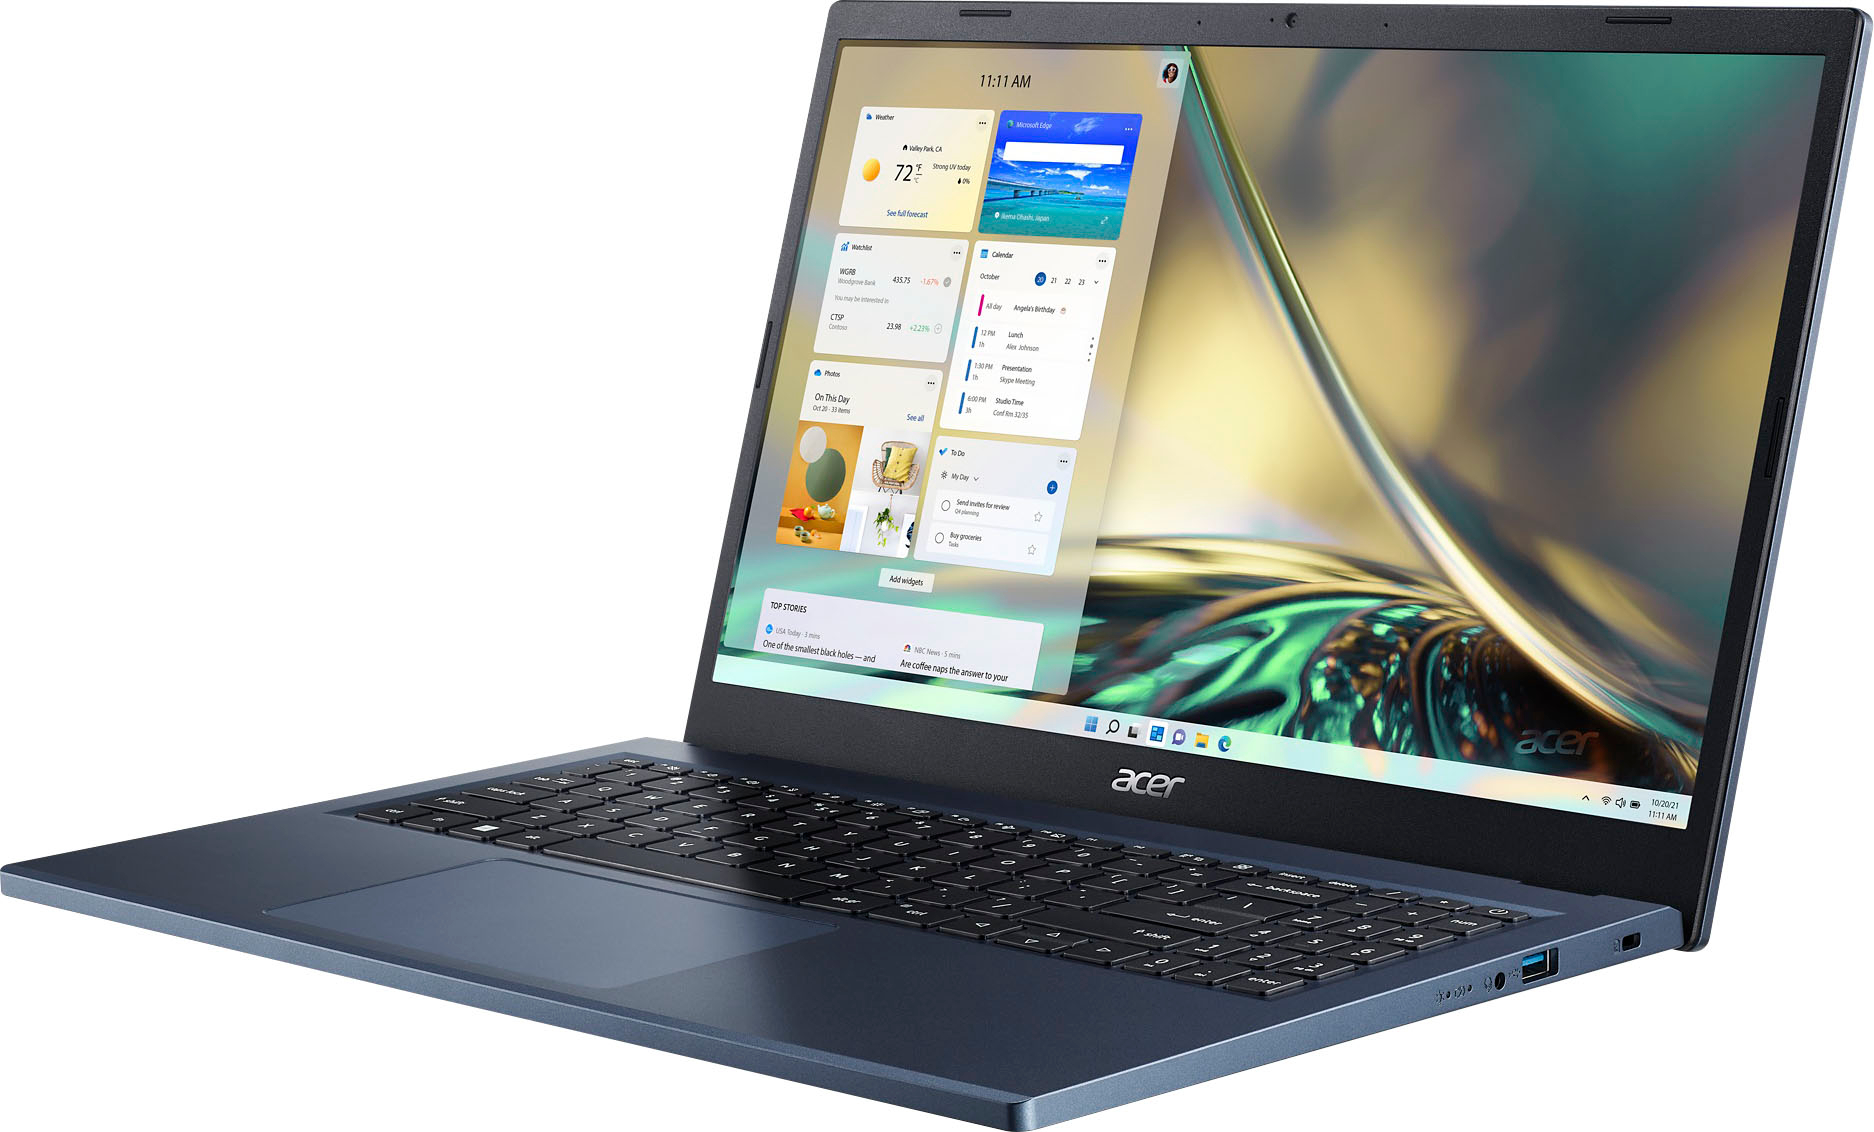 Acer Aspire 3 Laptop Review: An affordable Mendocino offering with  excellent battery life and a sub-par screen : r/AMDLaptops